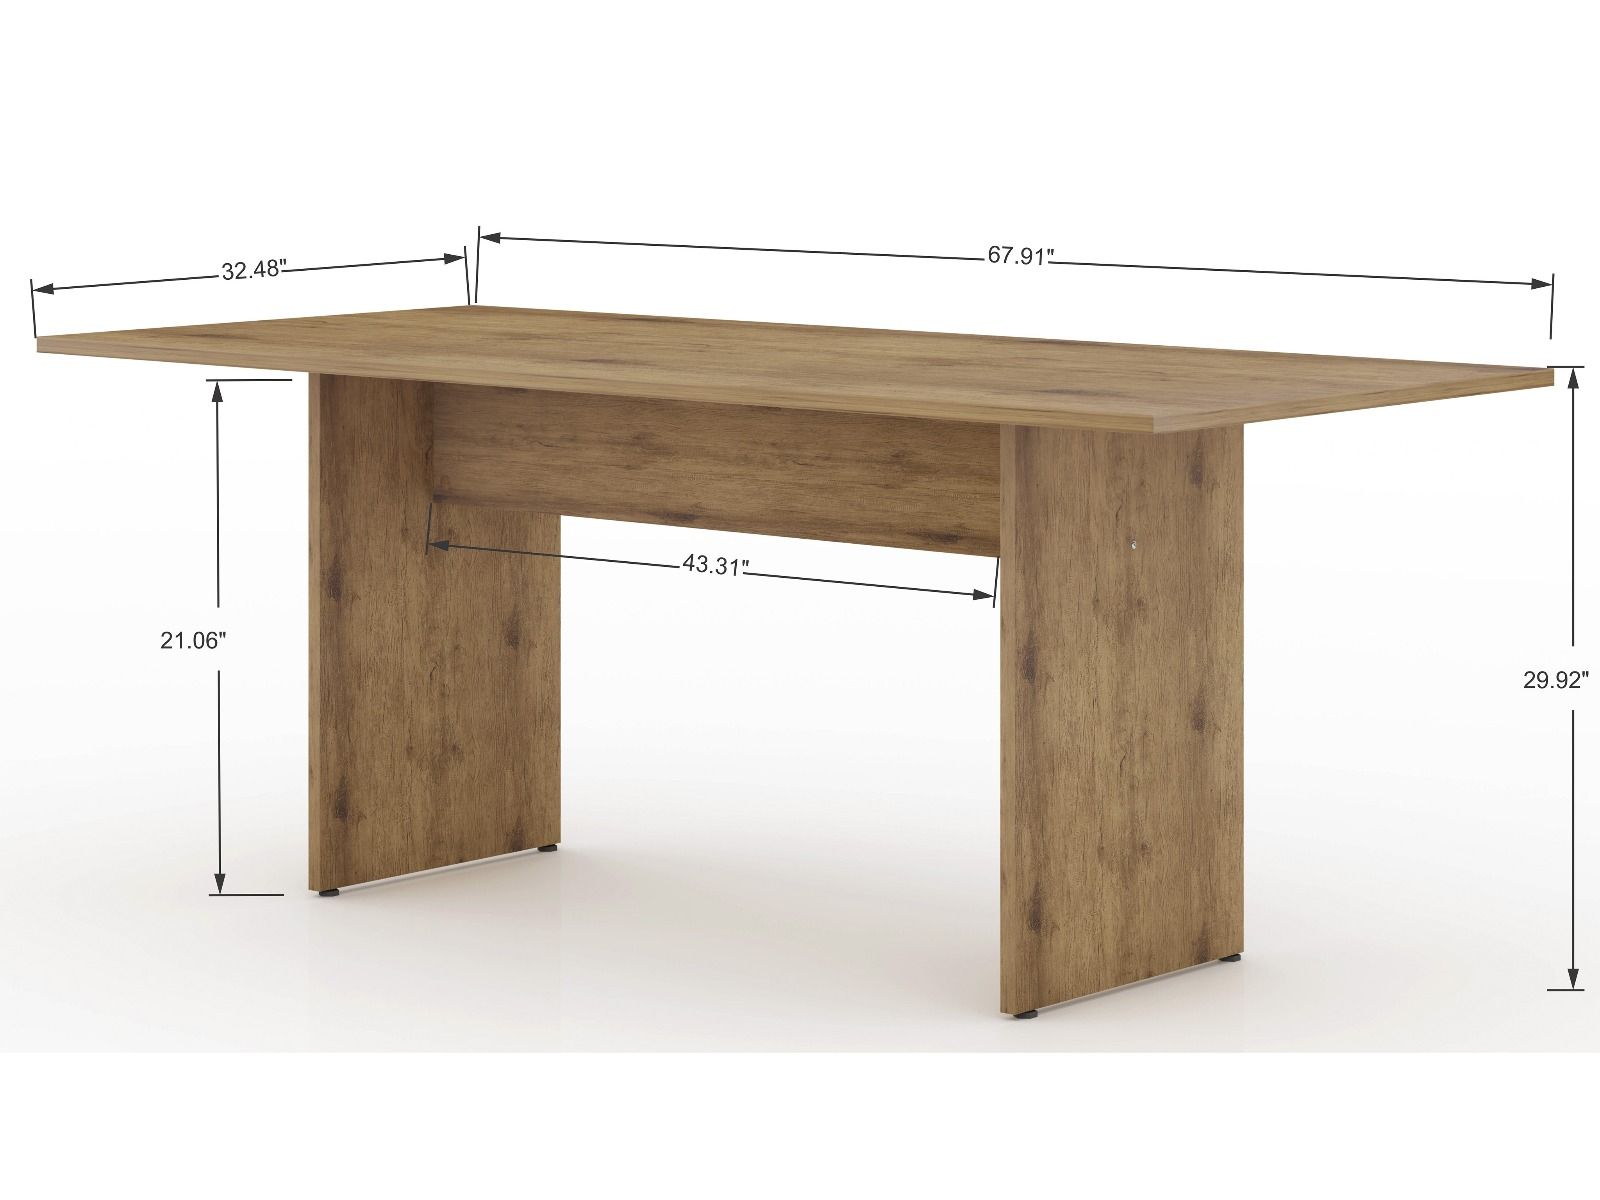 Weight and Dimension (Length, Depth, Width, Height) of Mondella Reburgo Dining Table from Dining Table Mart (MON022301)